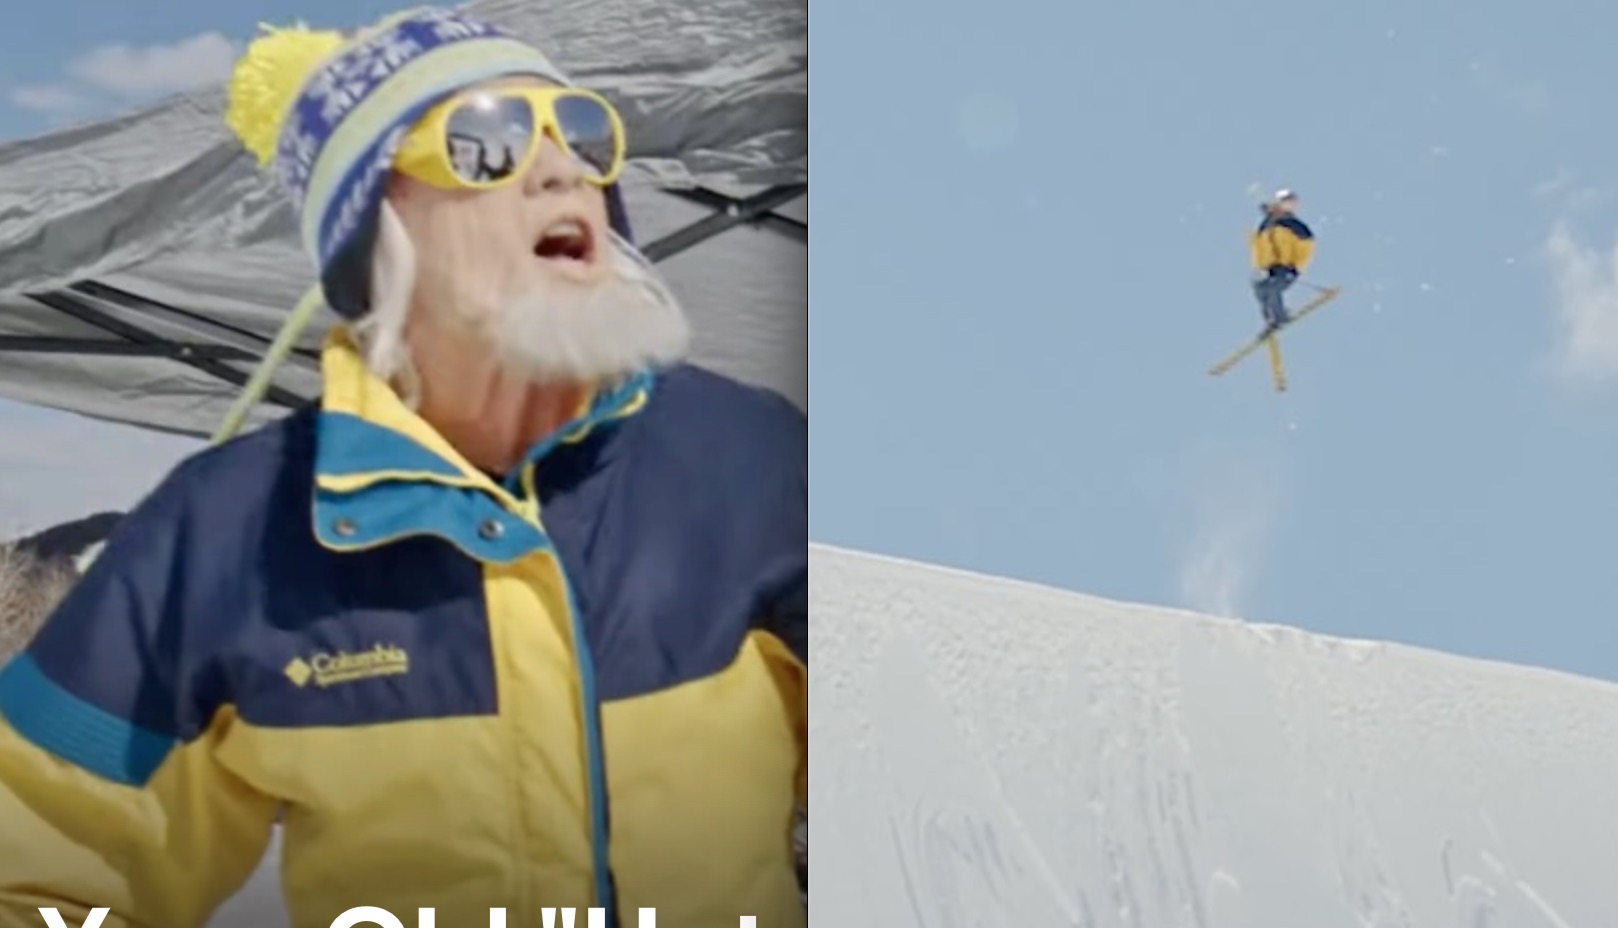 VIDEO: Cranky Old Skier Teaches Snowboarders A Thing or Two